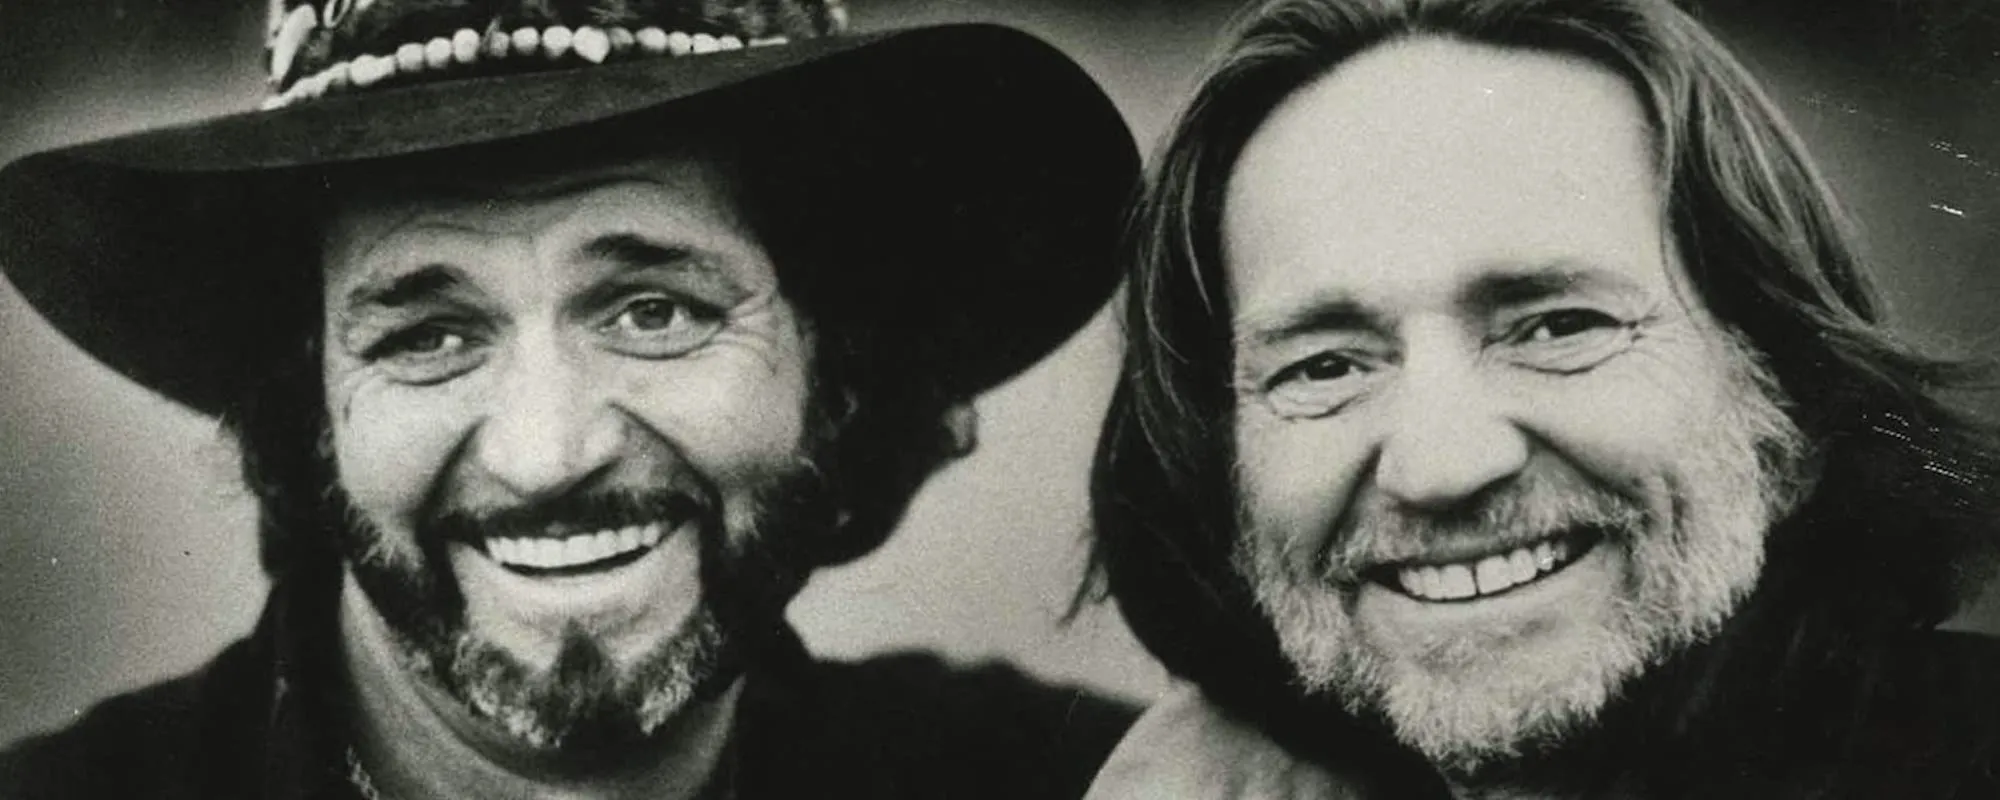 Willie Nelson Shares How Longtime Drummer Paul English Supported Him During Depression, Suicide Attempt